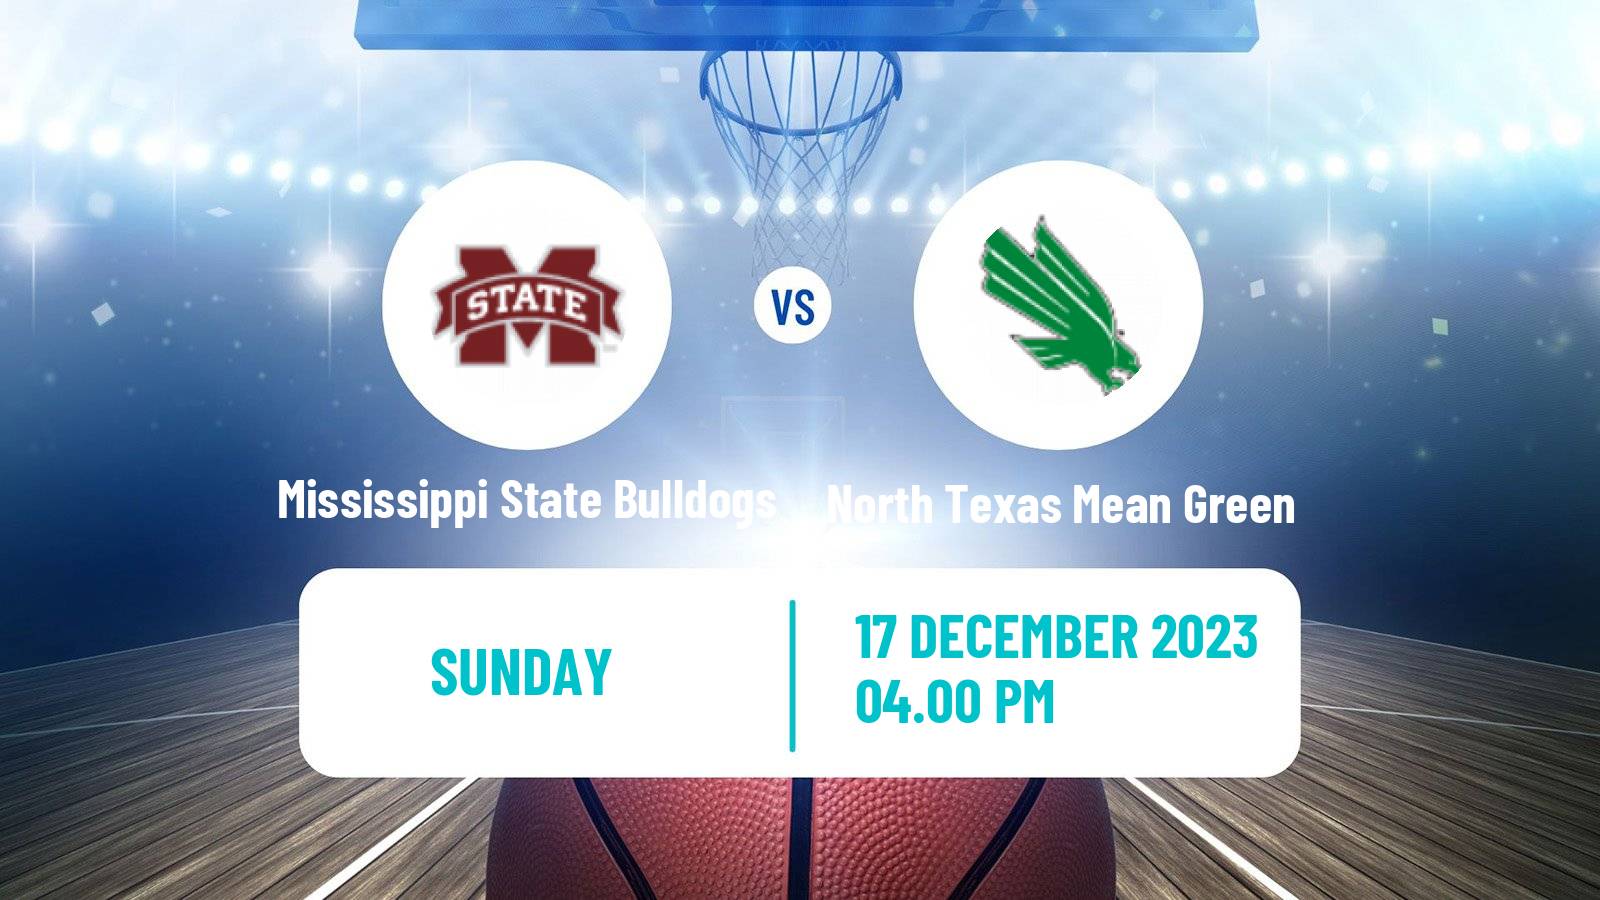 Basketball NCAA College Basketball Mississippi State Bulldogs - North Texas Mean Green